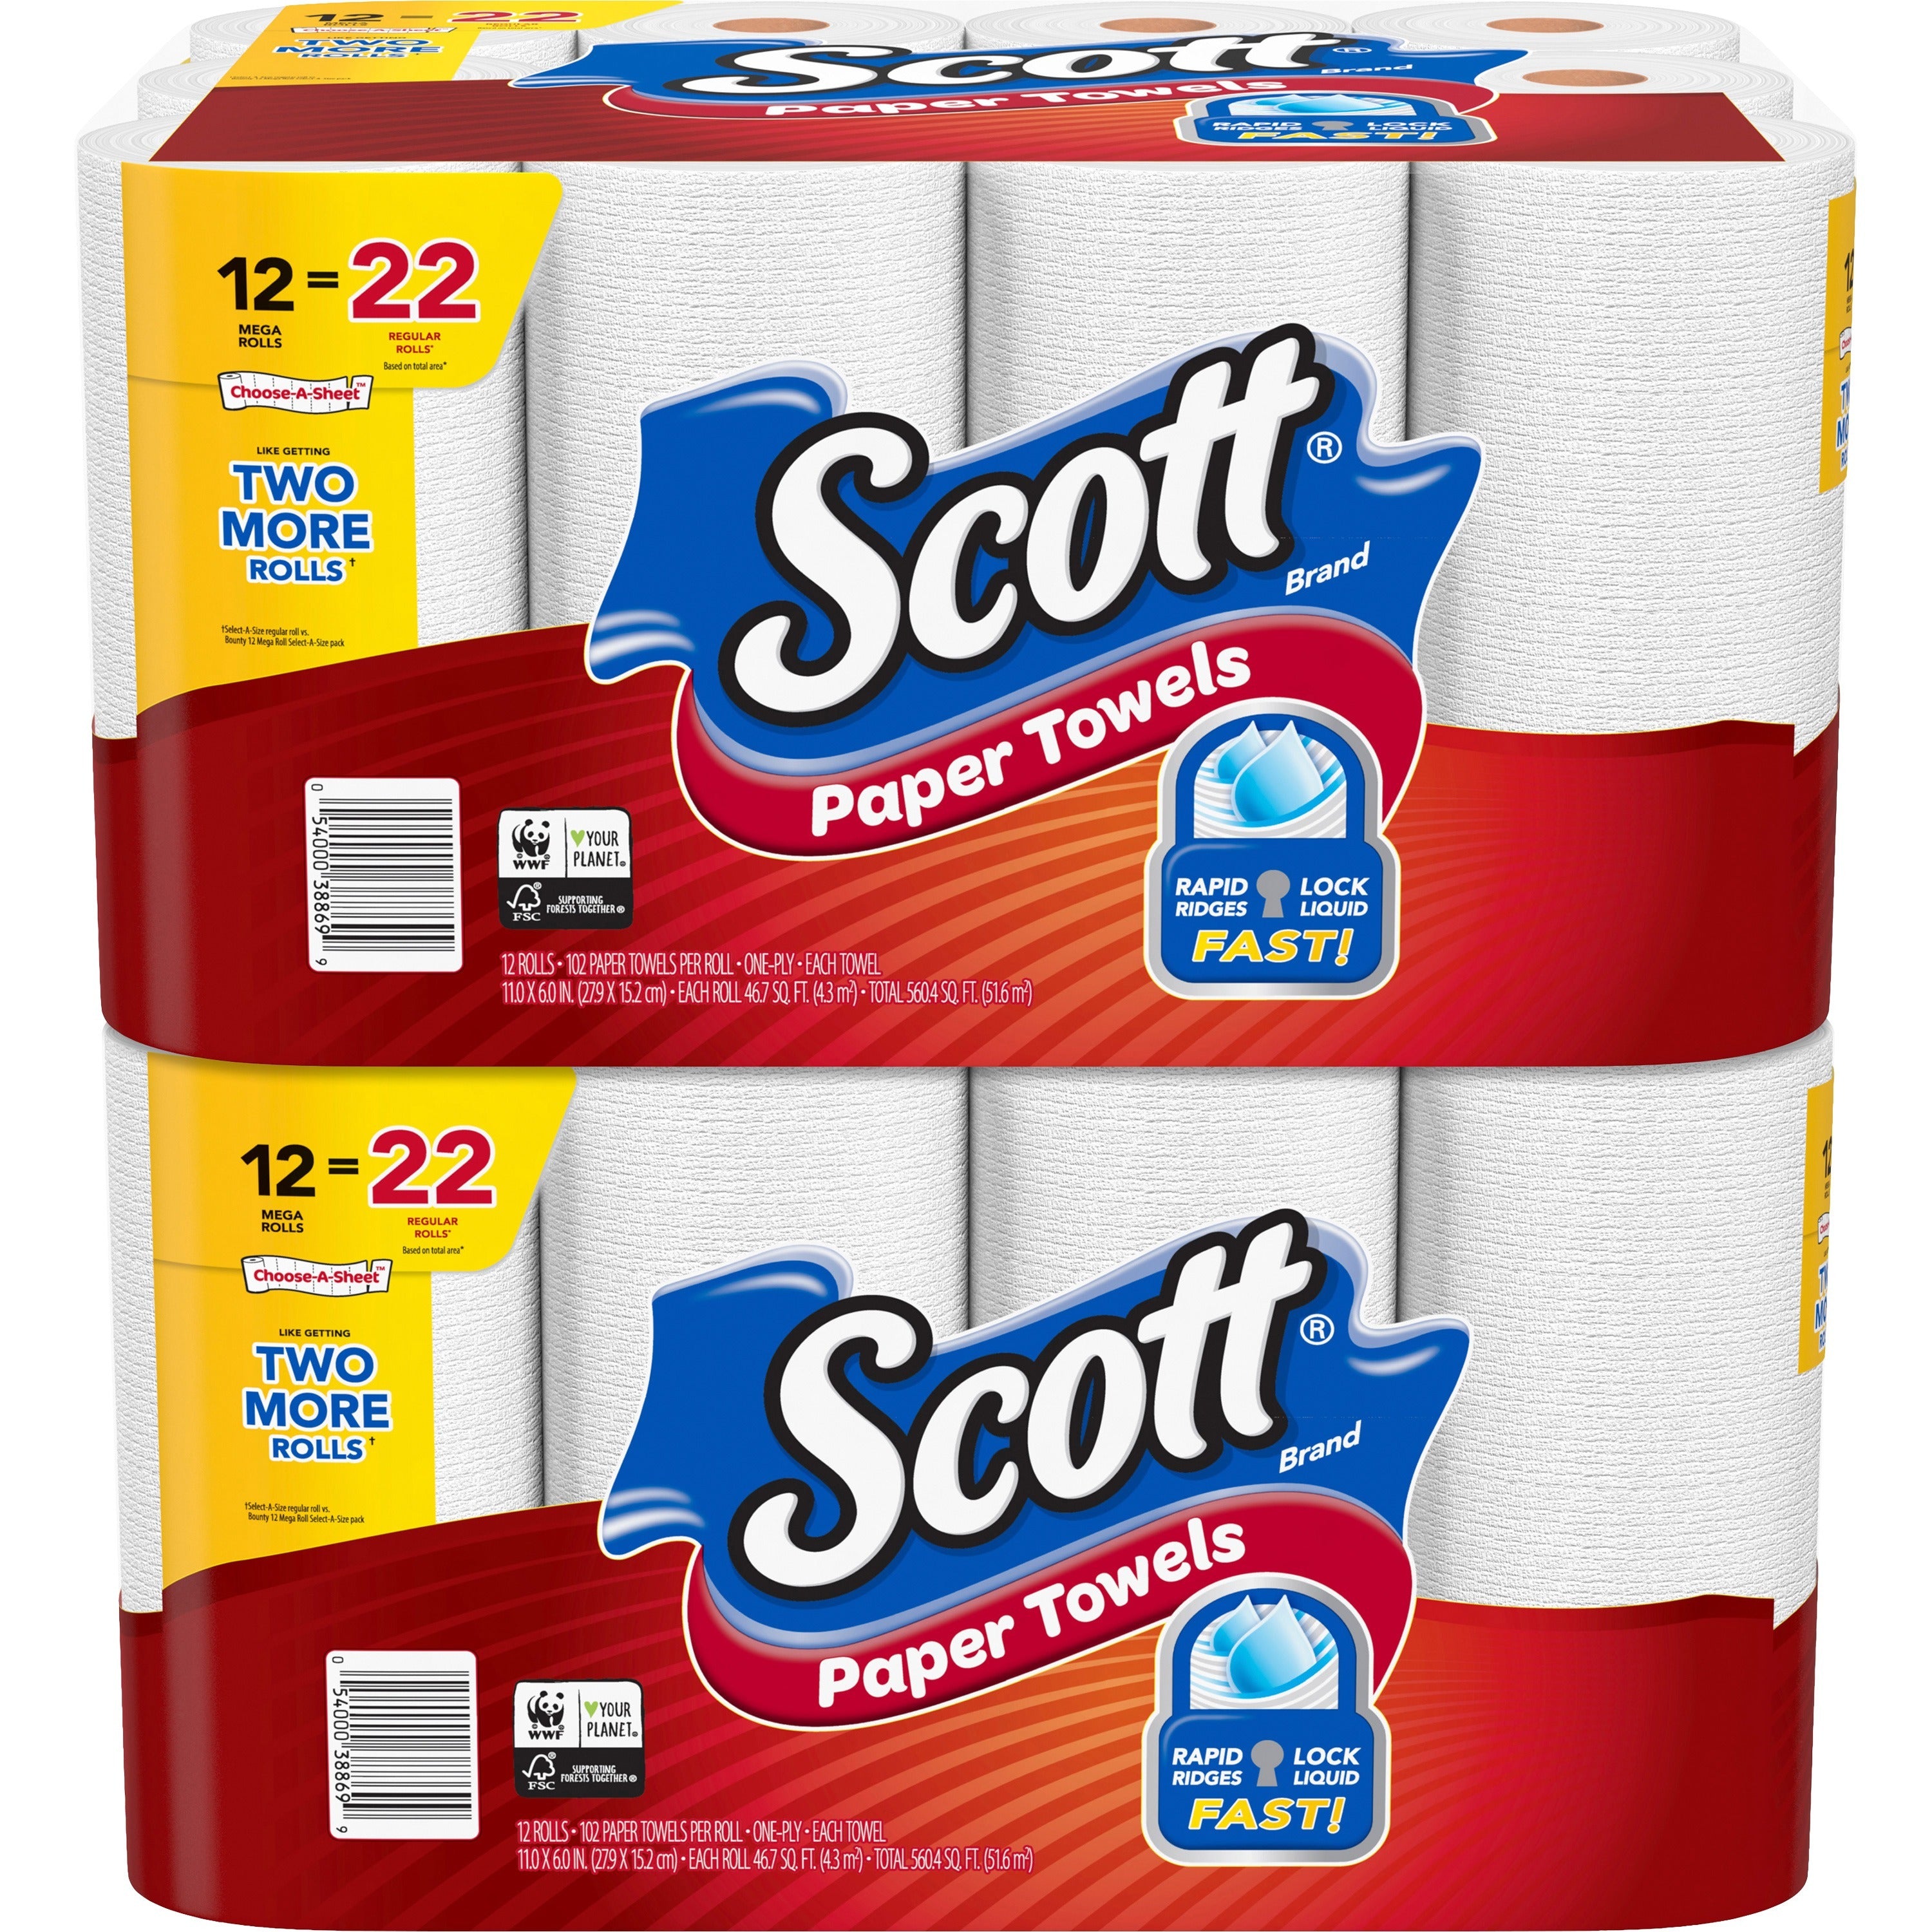 scott-choose-a-sheet-paper-towels-mega-rolls-1-ply-11-x-6-102-sheets-roll-white-perforated-absorbent-for-home-office-school-12-per-pack-2-carton_kcc38869ct - 1